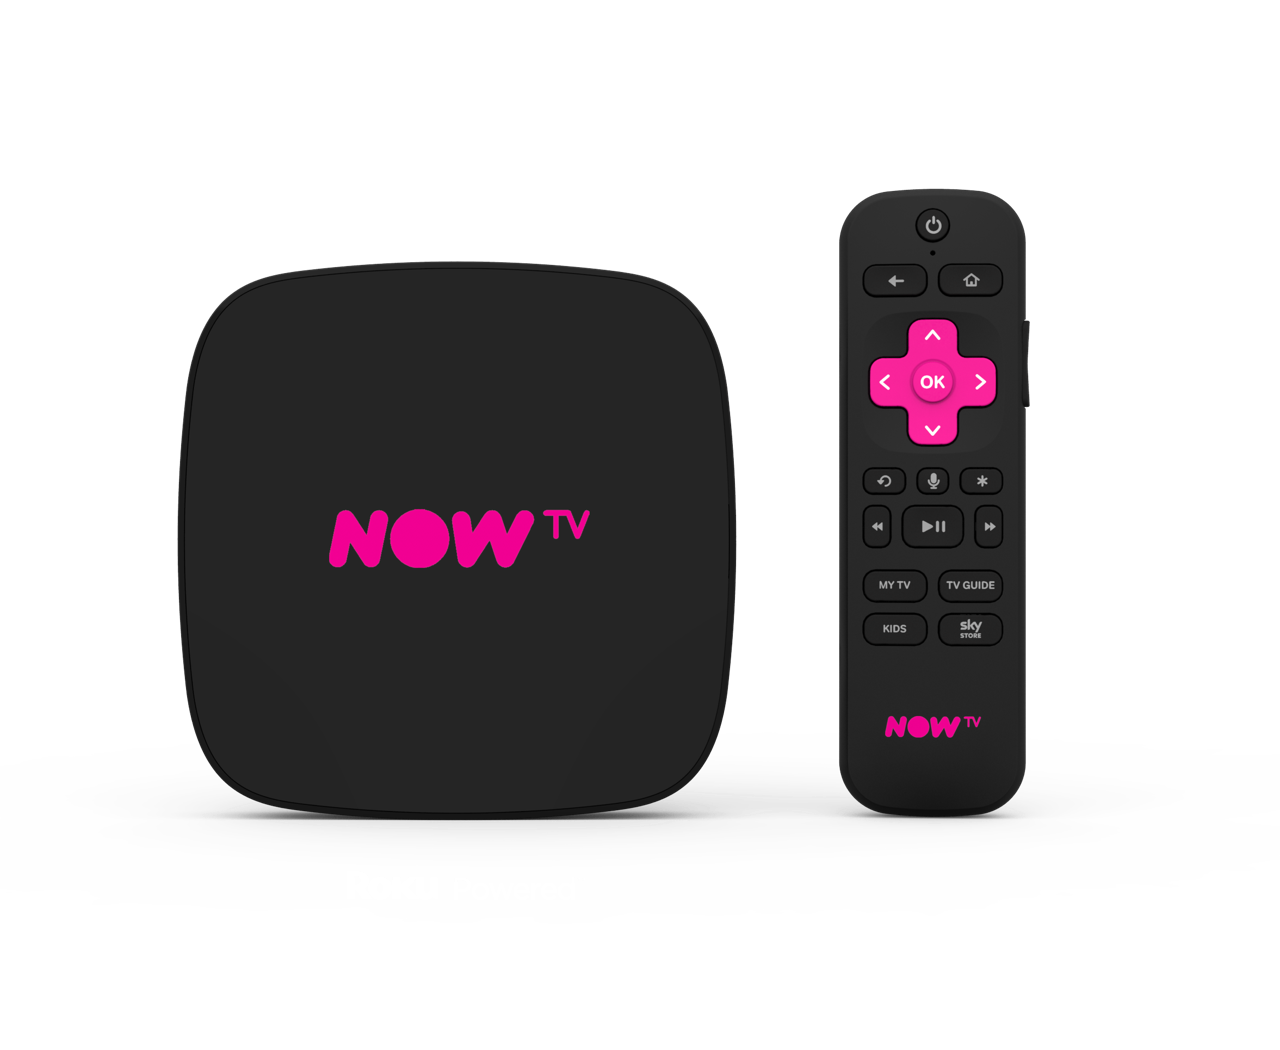 Introducing the new NOW TV Smart Box with 4K & Voice Search.